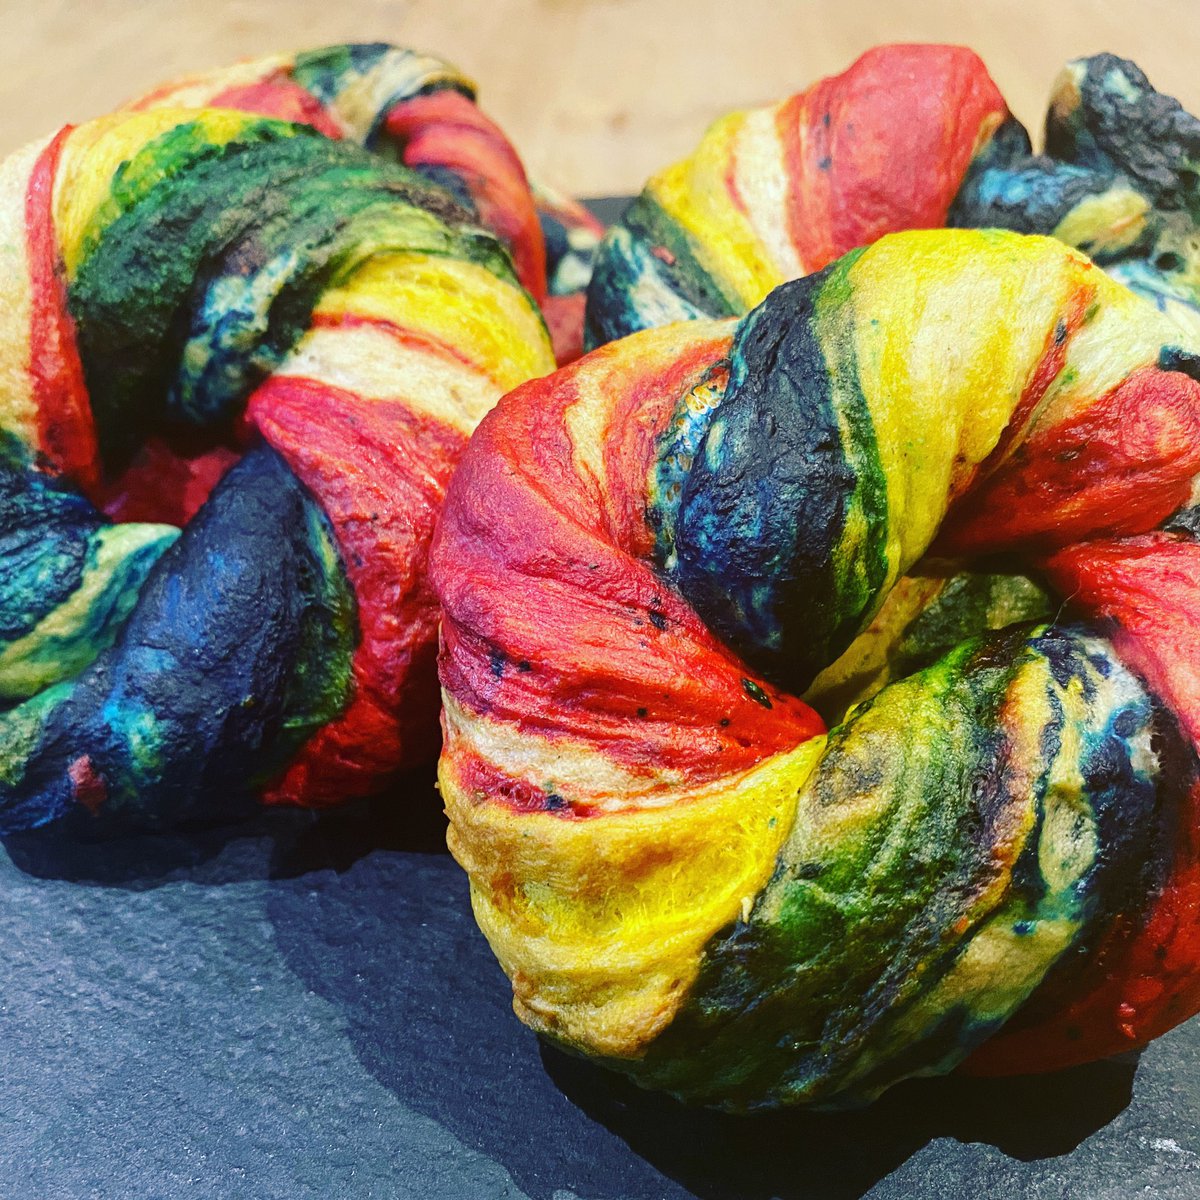 My first attempt at the controversial #rainbowbagels #GBBO #bakeoff